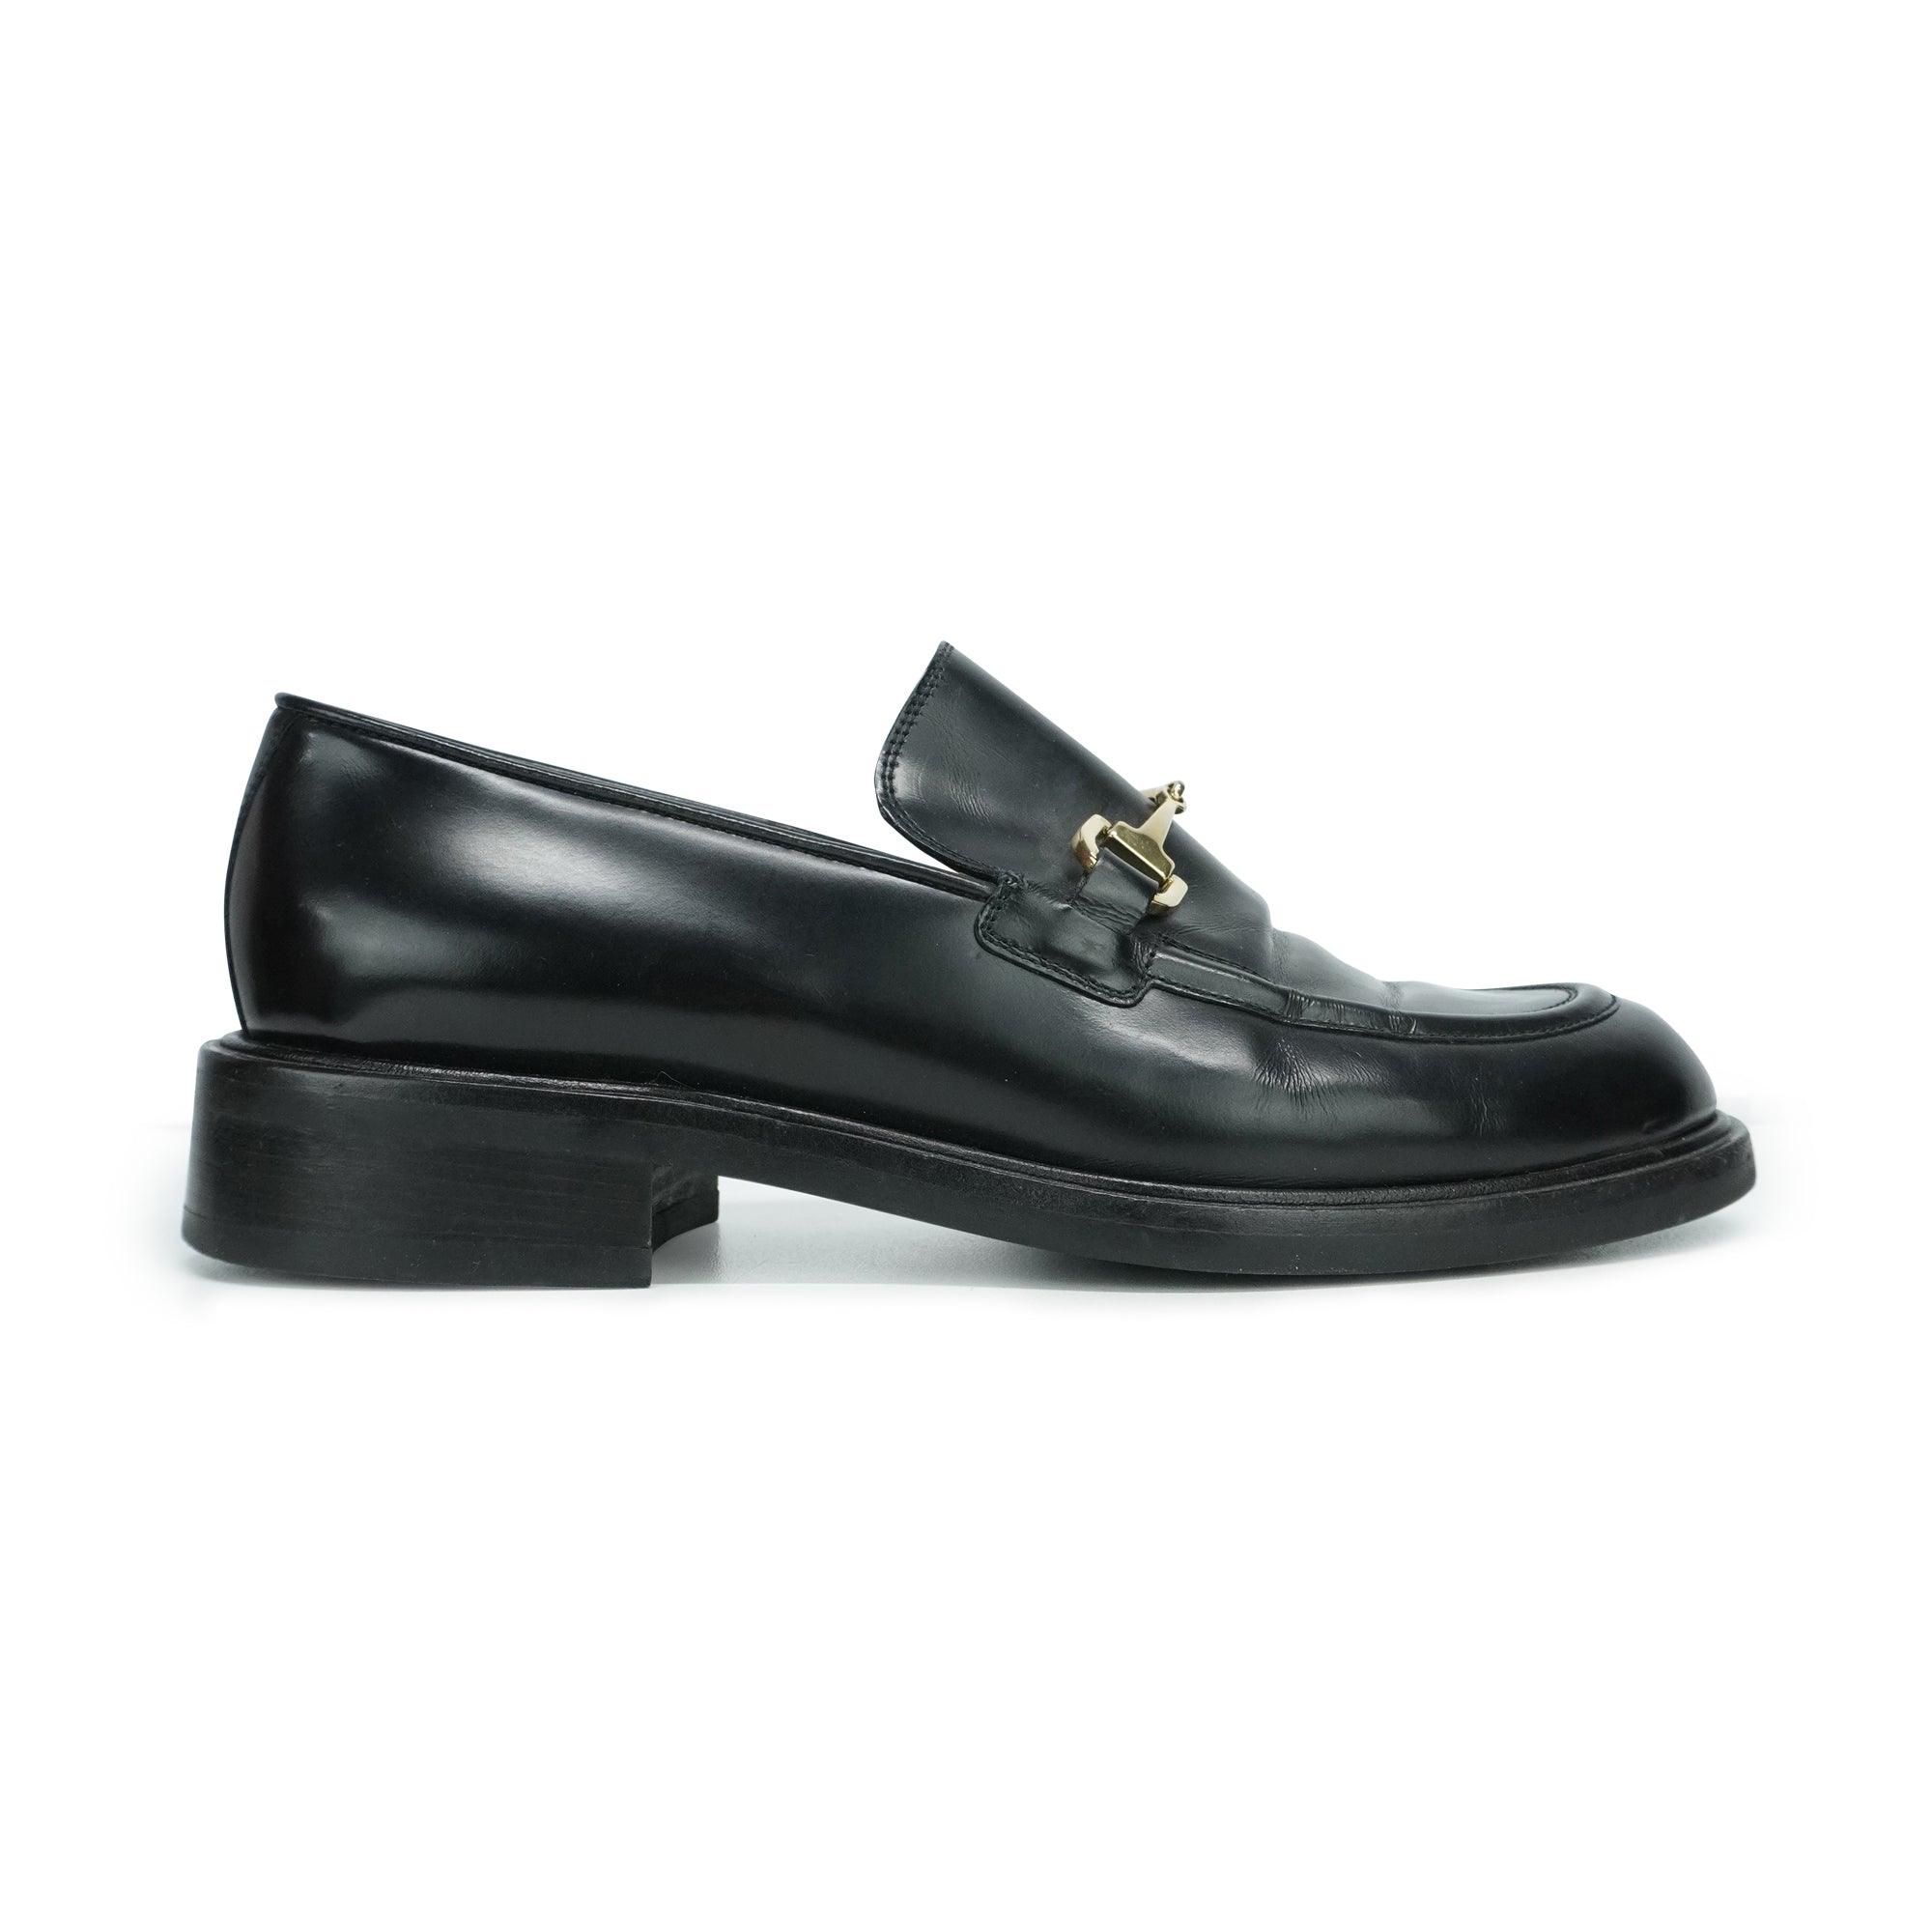 Gucci Loafers - Women's 36.5 - Fashionably Yours